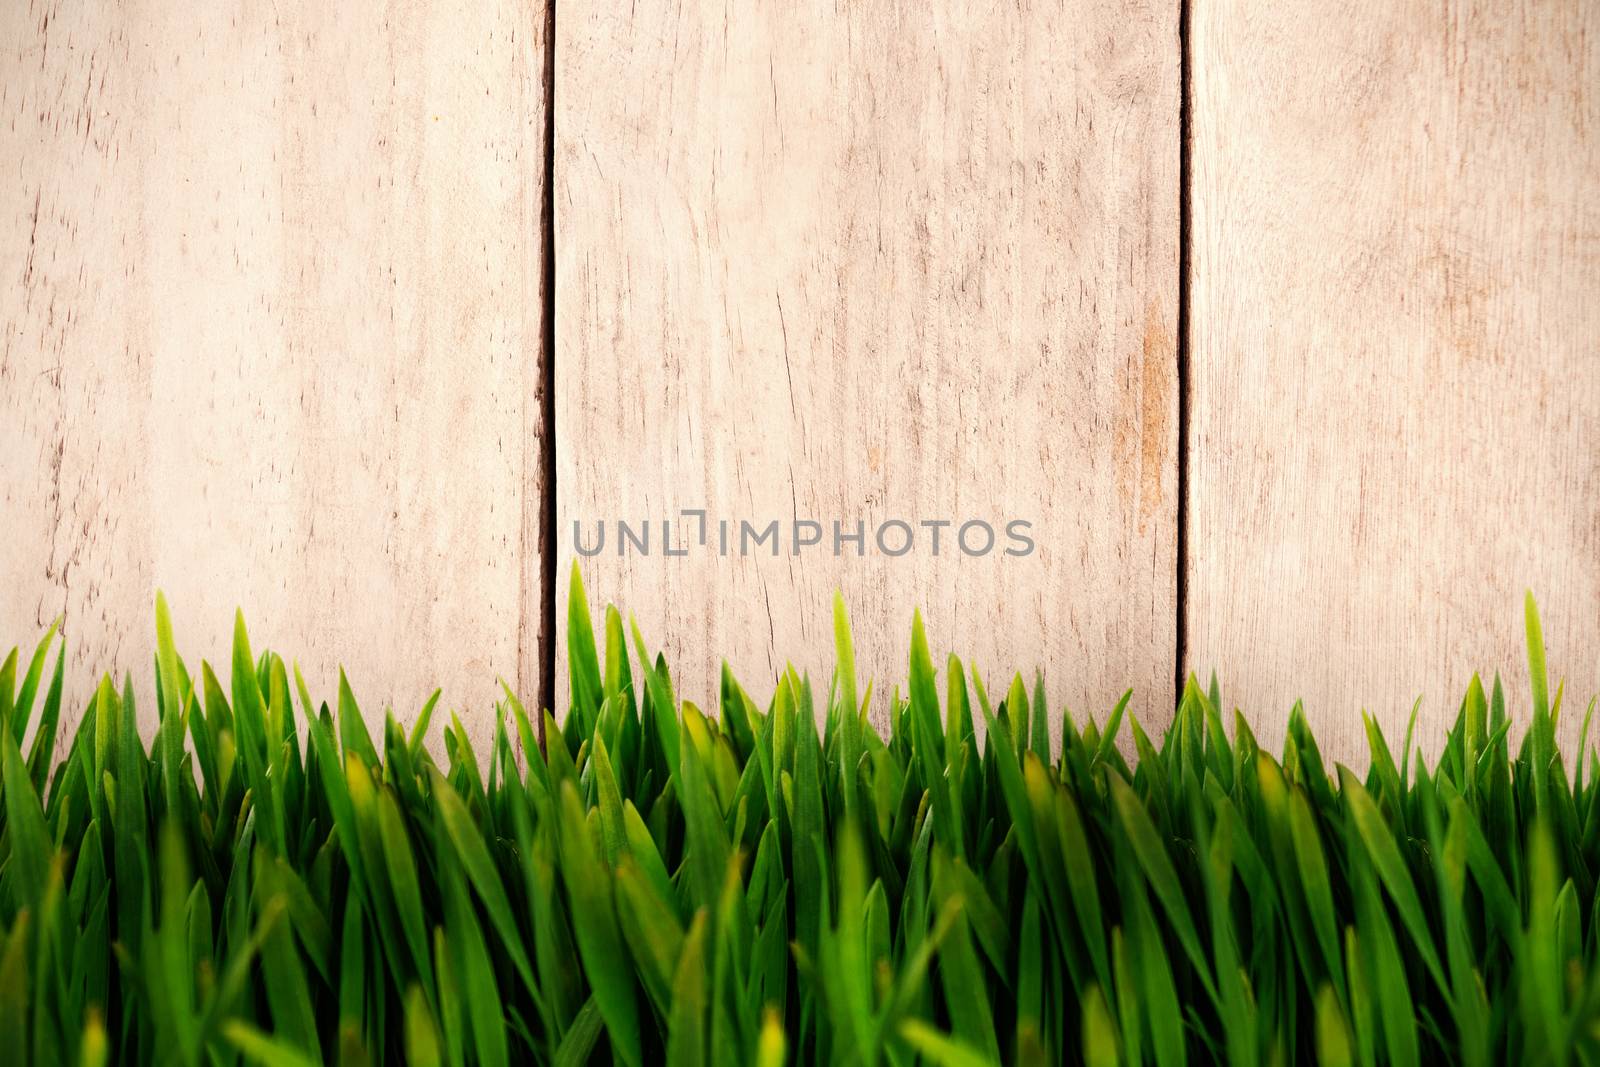 Grass growing outdoors against wood panelling